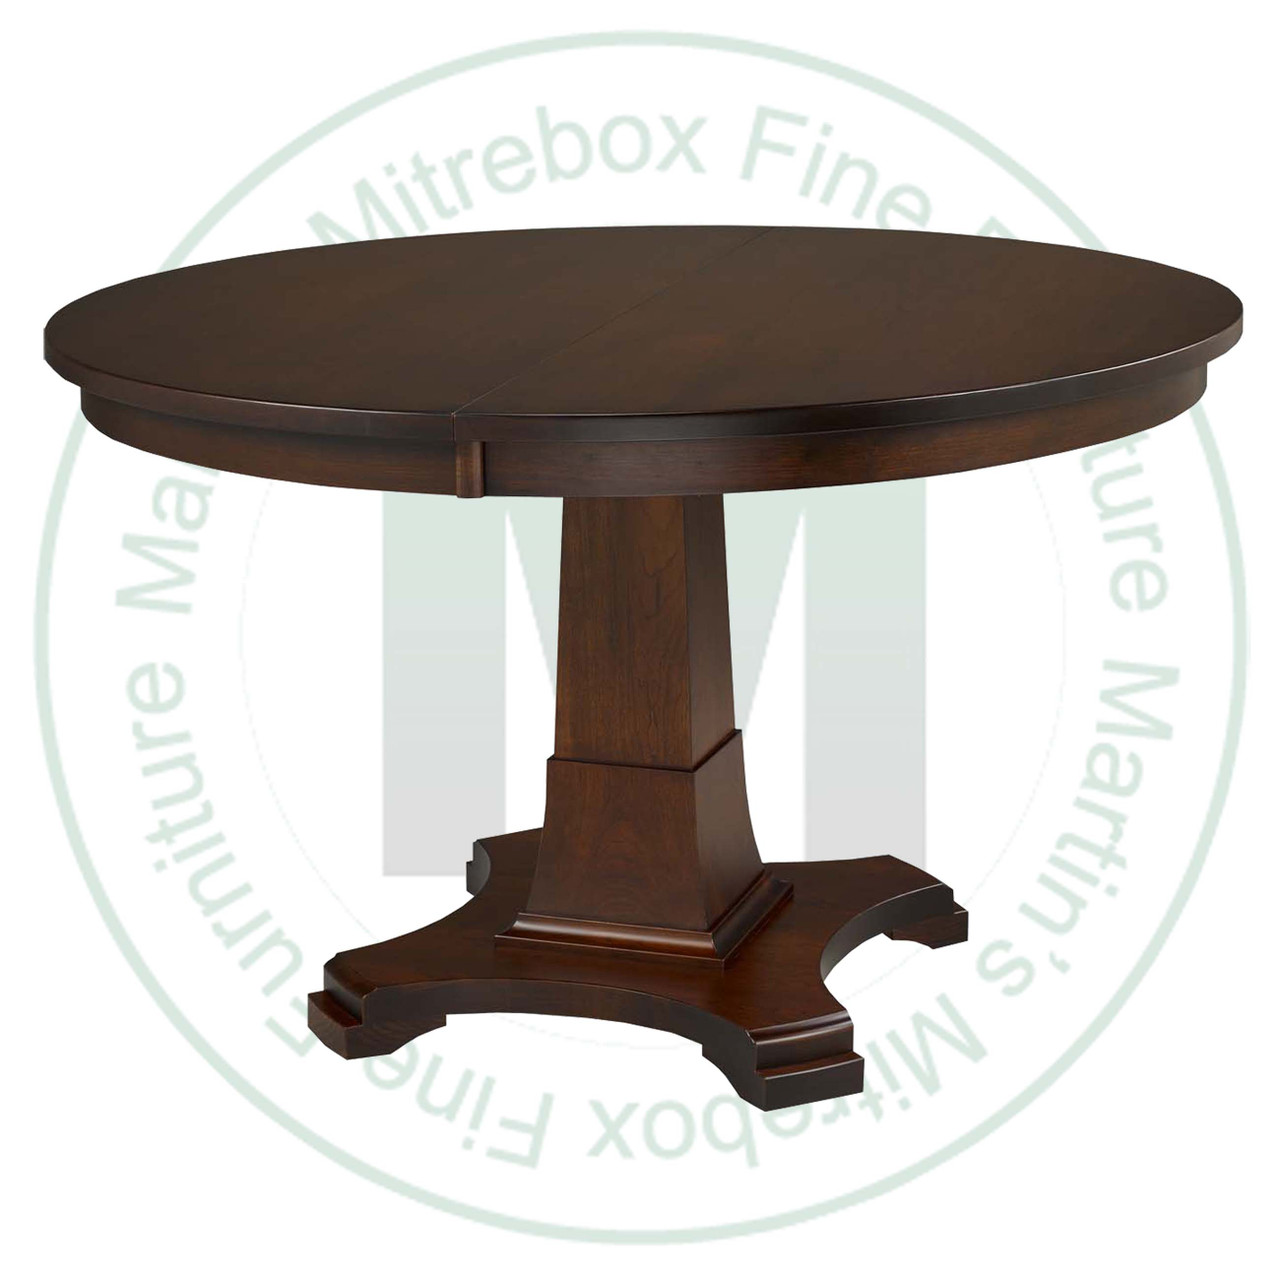 Wormy Maple Abbey Single Pedestal Table 42''D x 54''W x 30''H  Round Solid Table. Table Has 1.25'' Thick Top